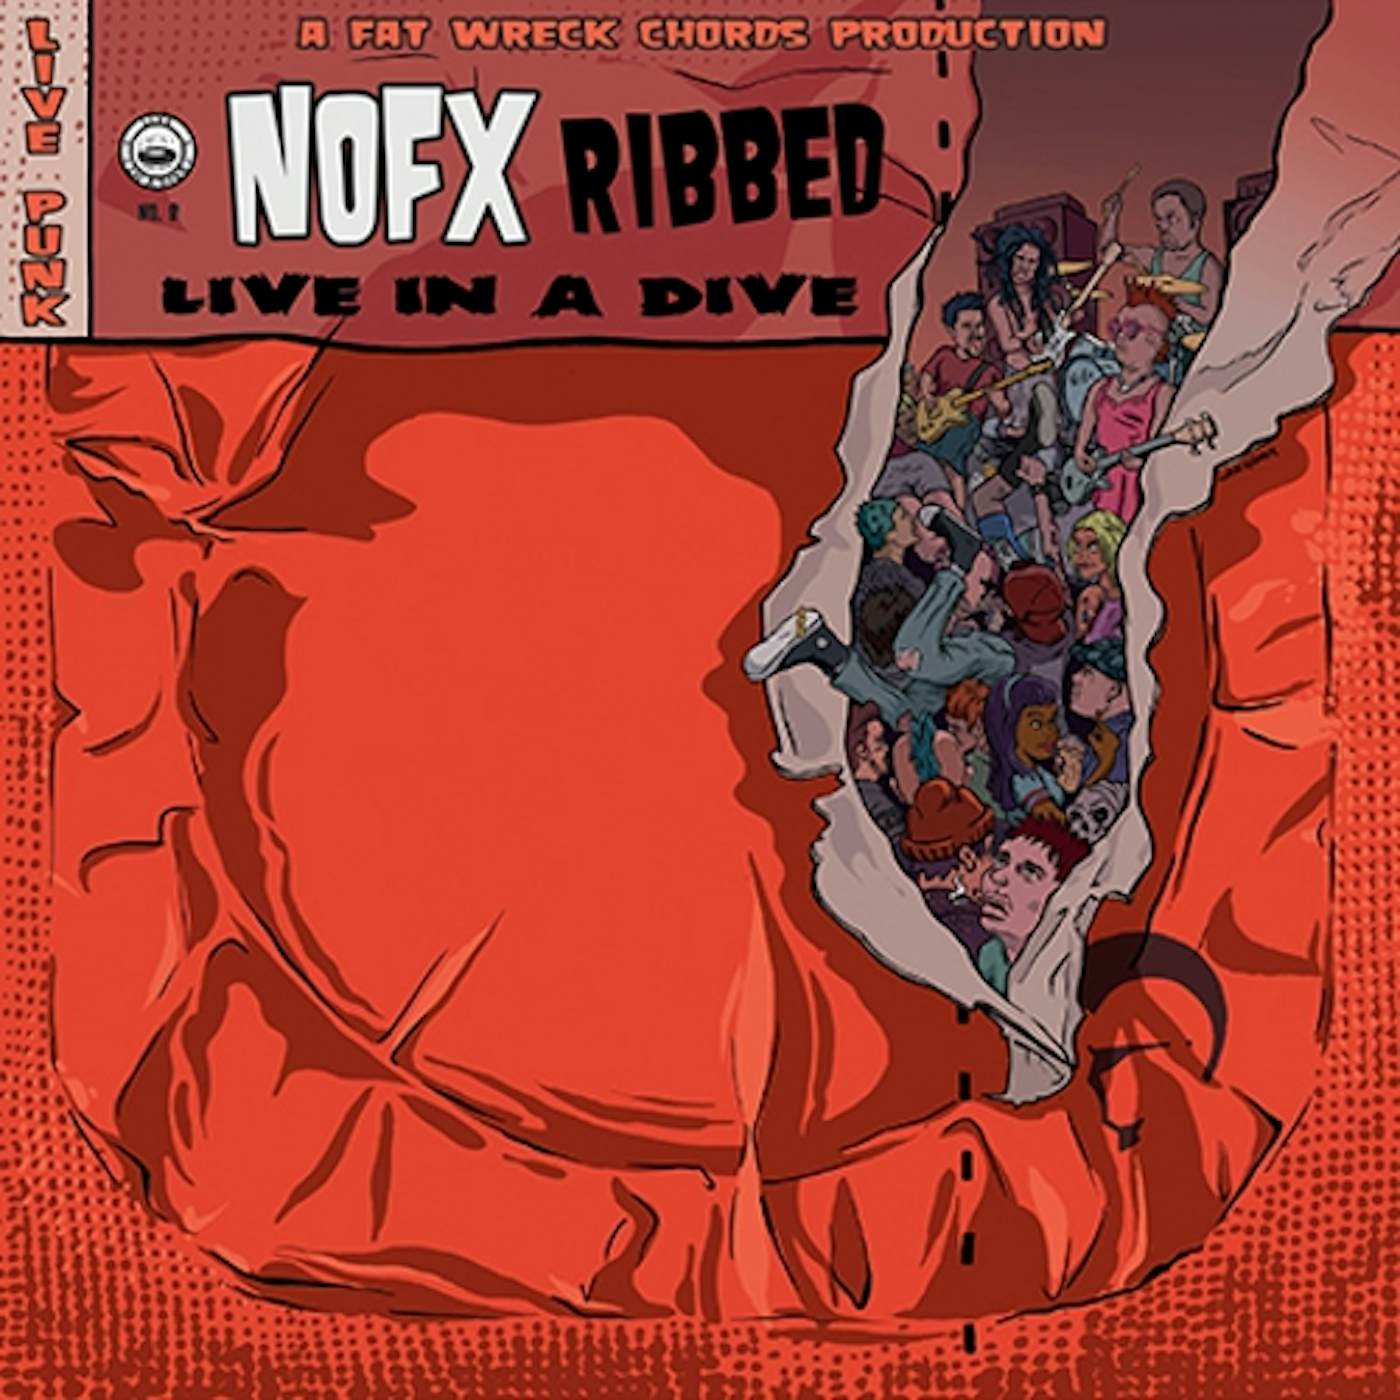 NOFX RIBBED- LIVE IN A DIVE Vinyl Record